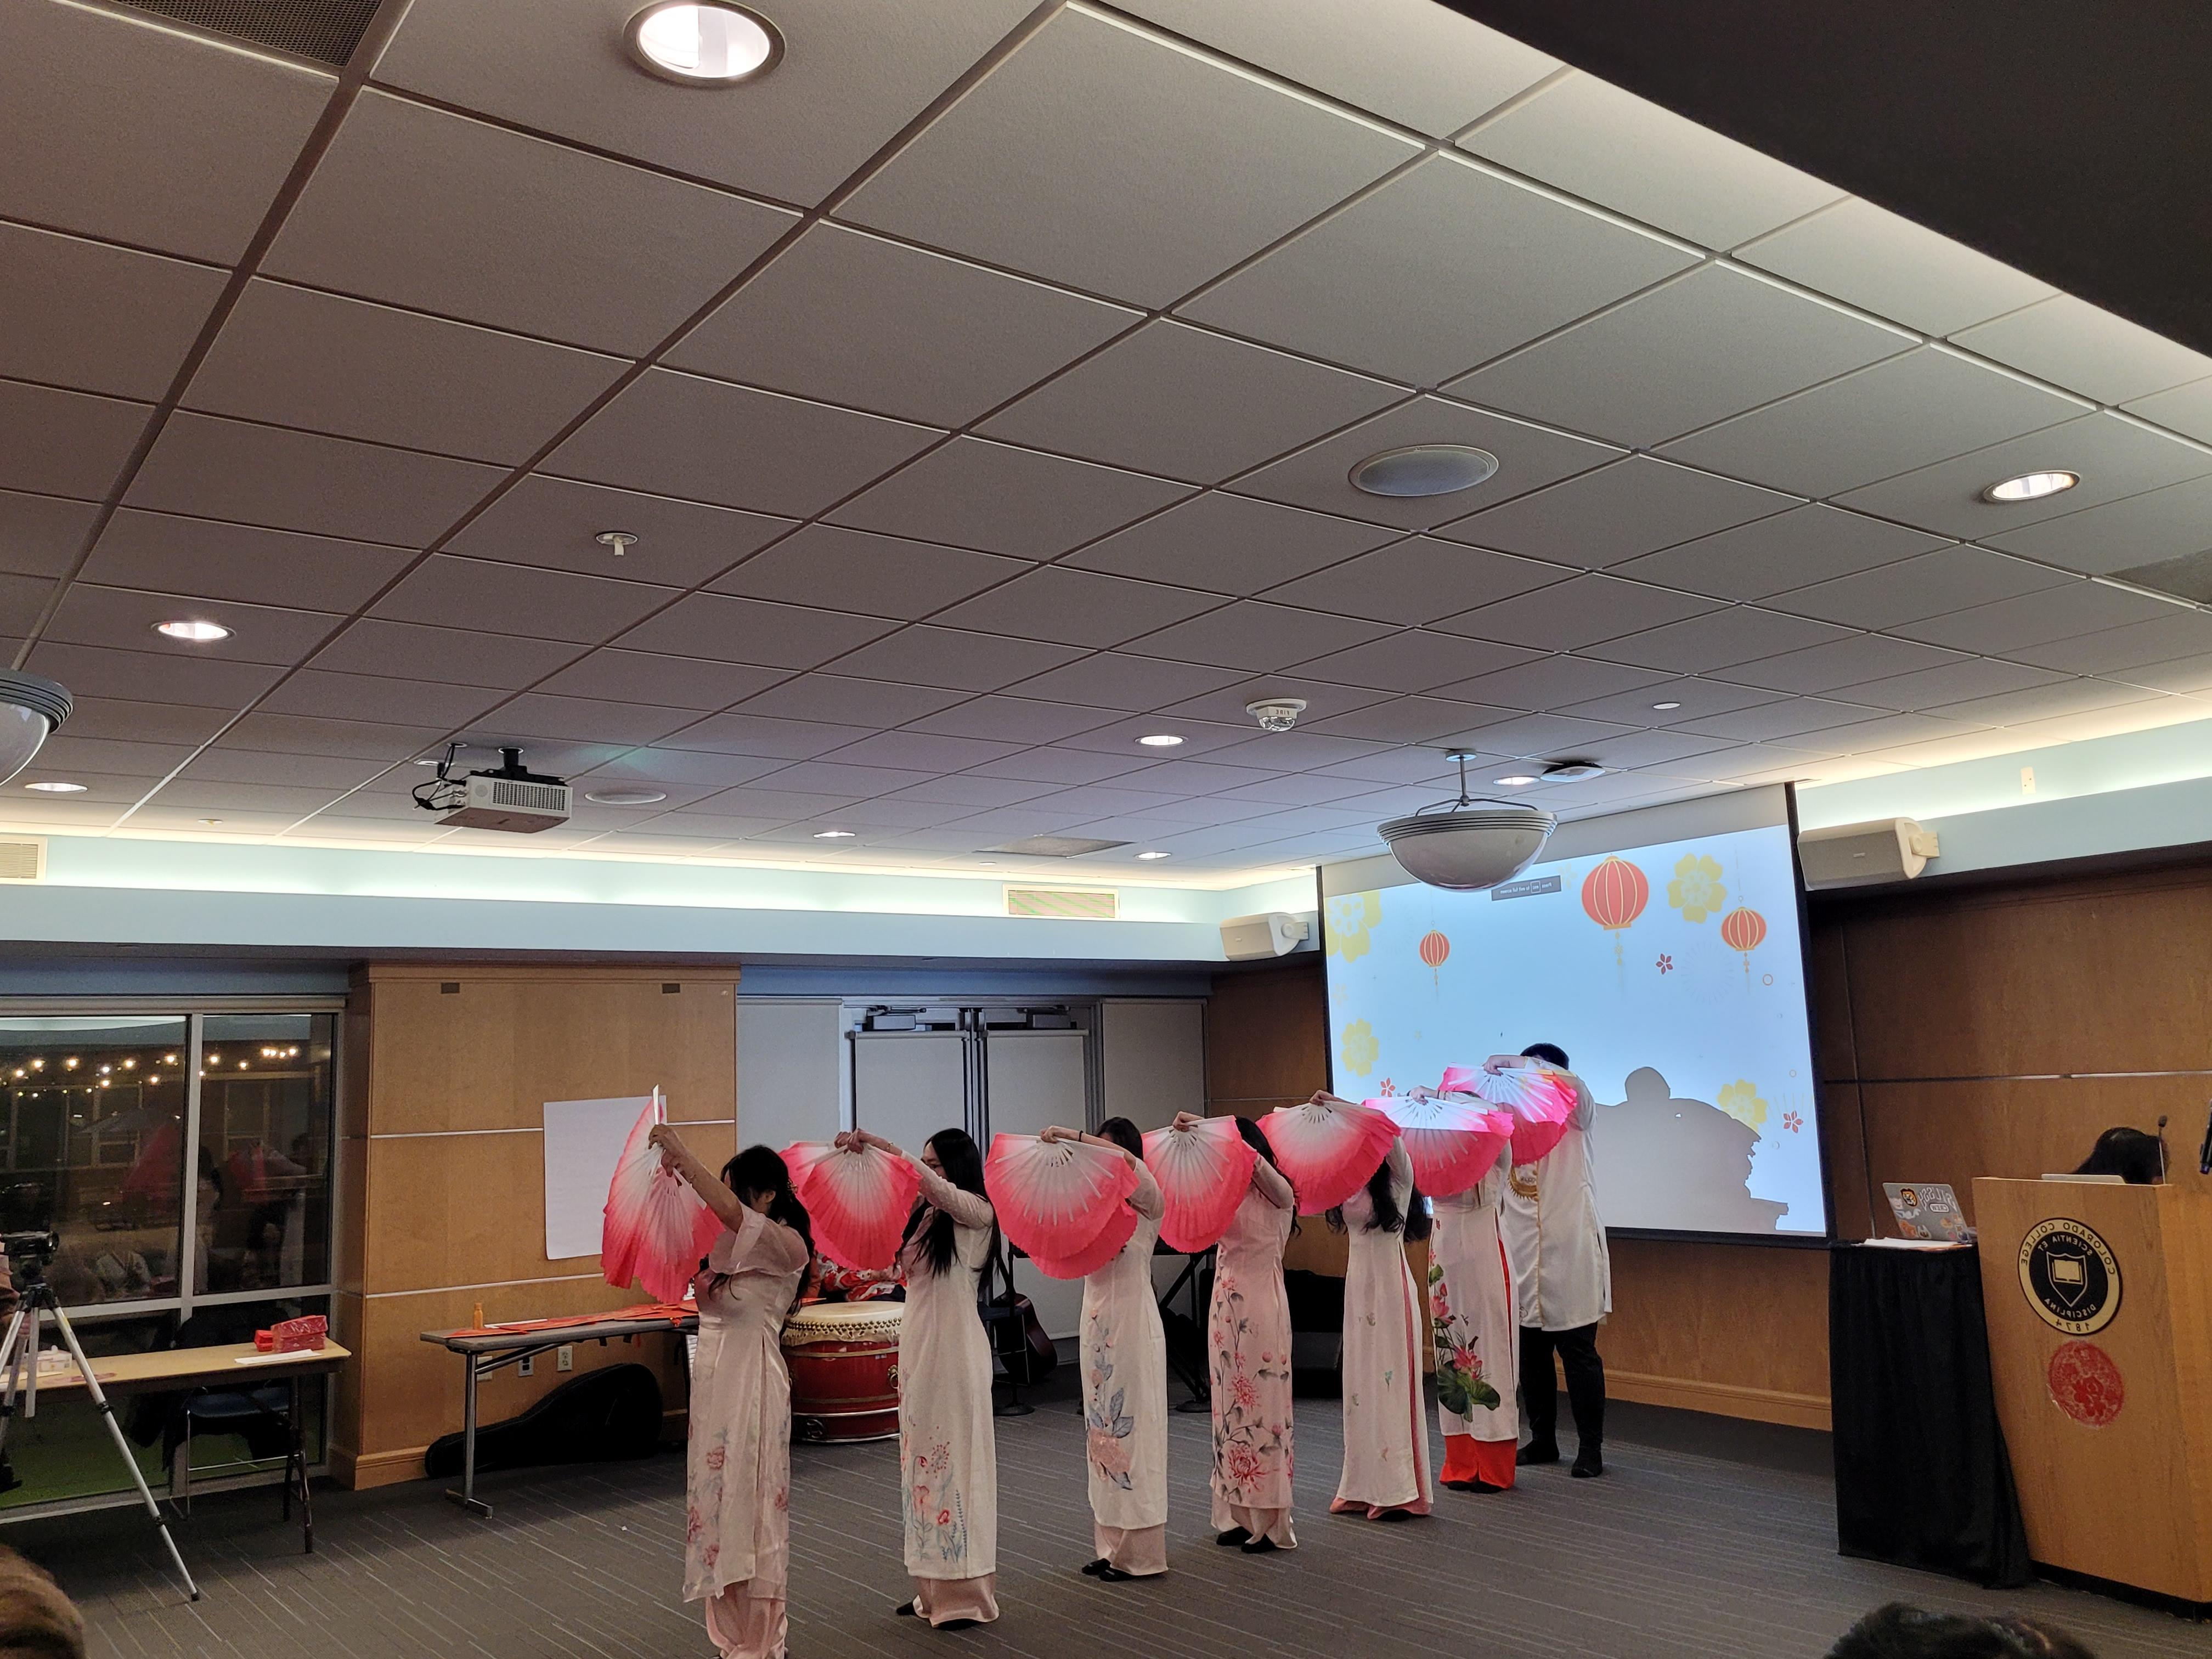 Vietnamese Fan Dance: Asian Students Union led by Serena <span class="cc-gallery-credit"></span>